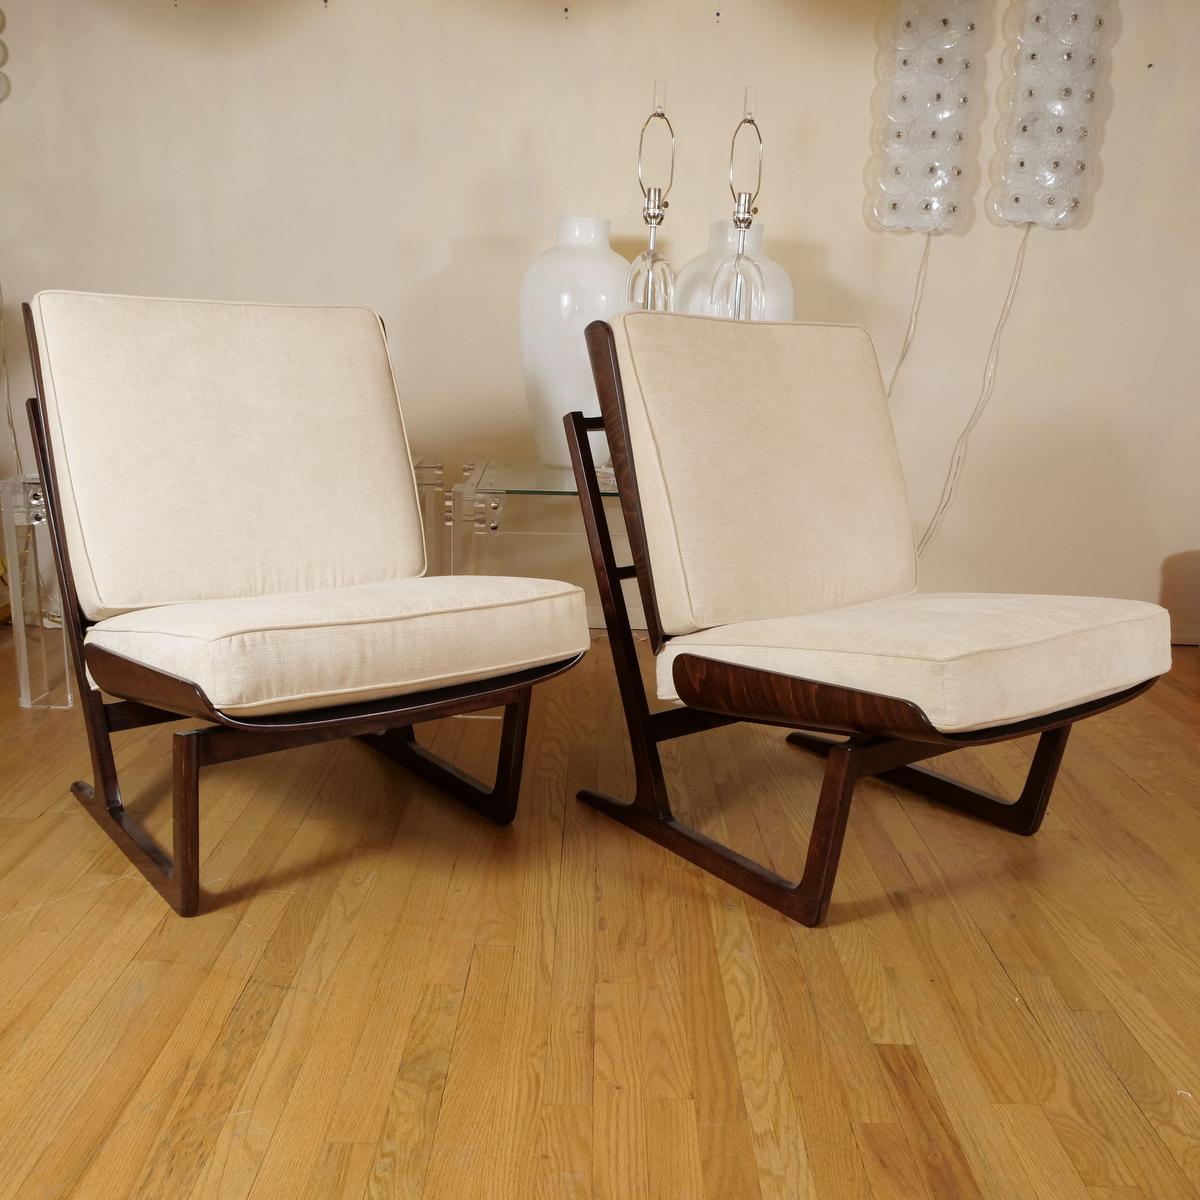 Pair of walnut stained maple chairs with upholstered seat and back.
1stdibs specialist’s recommendation is that these were made by Deco house, a company based out of Birmingham, Alabama. They were designed by Hans Juergens.